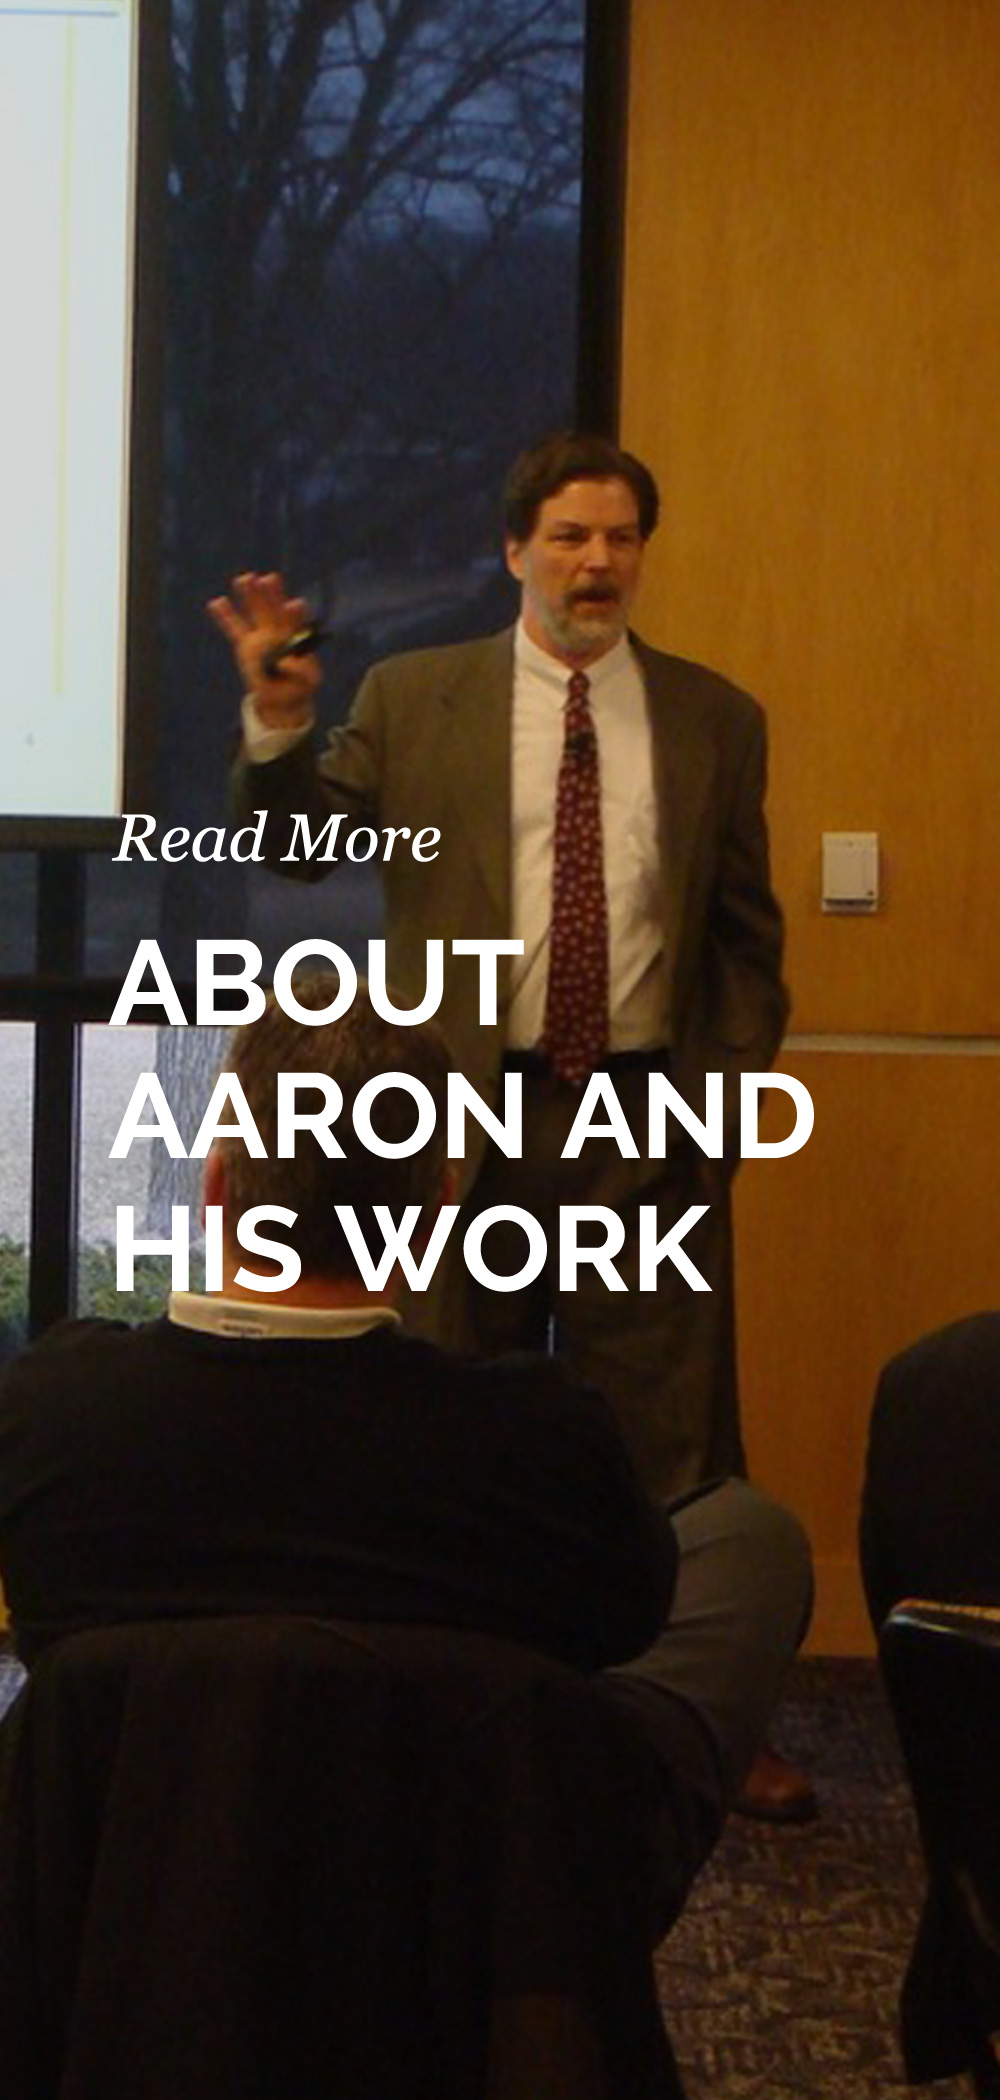 Read More ABOUT AARON AND HIS WORK